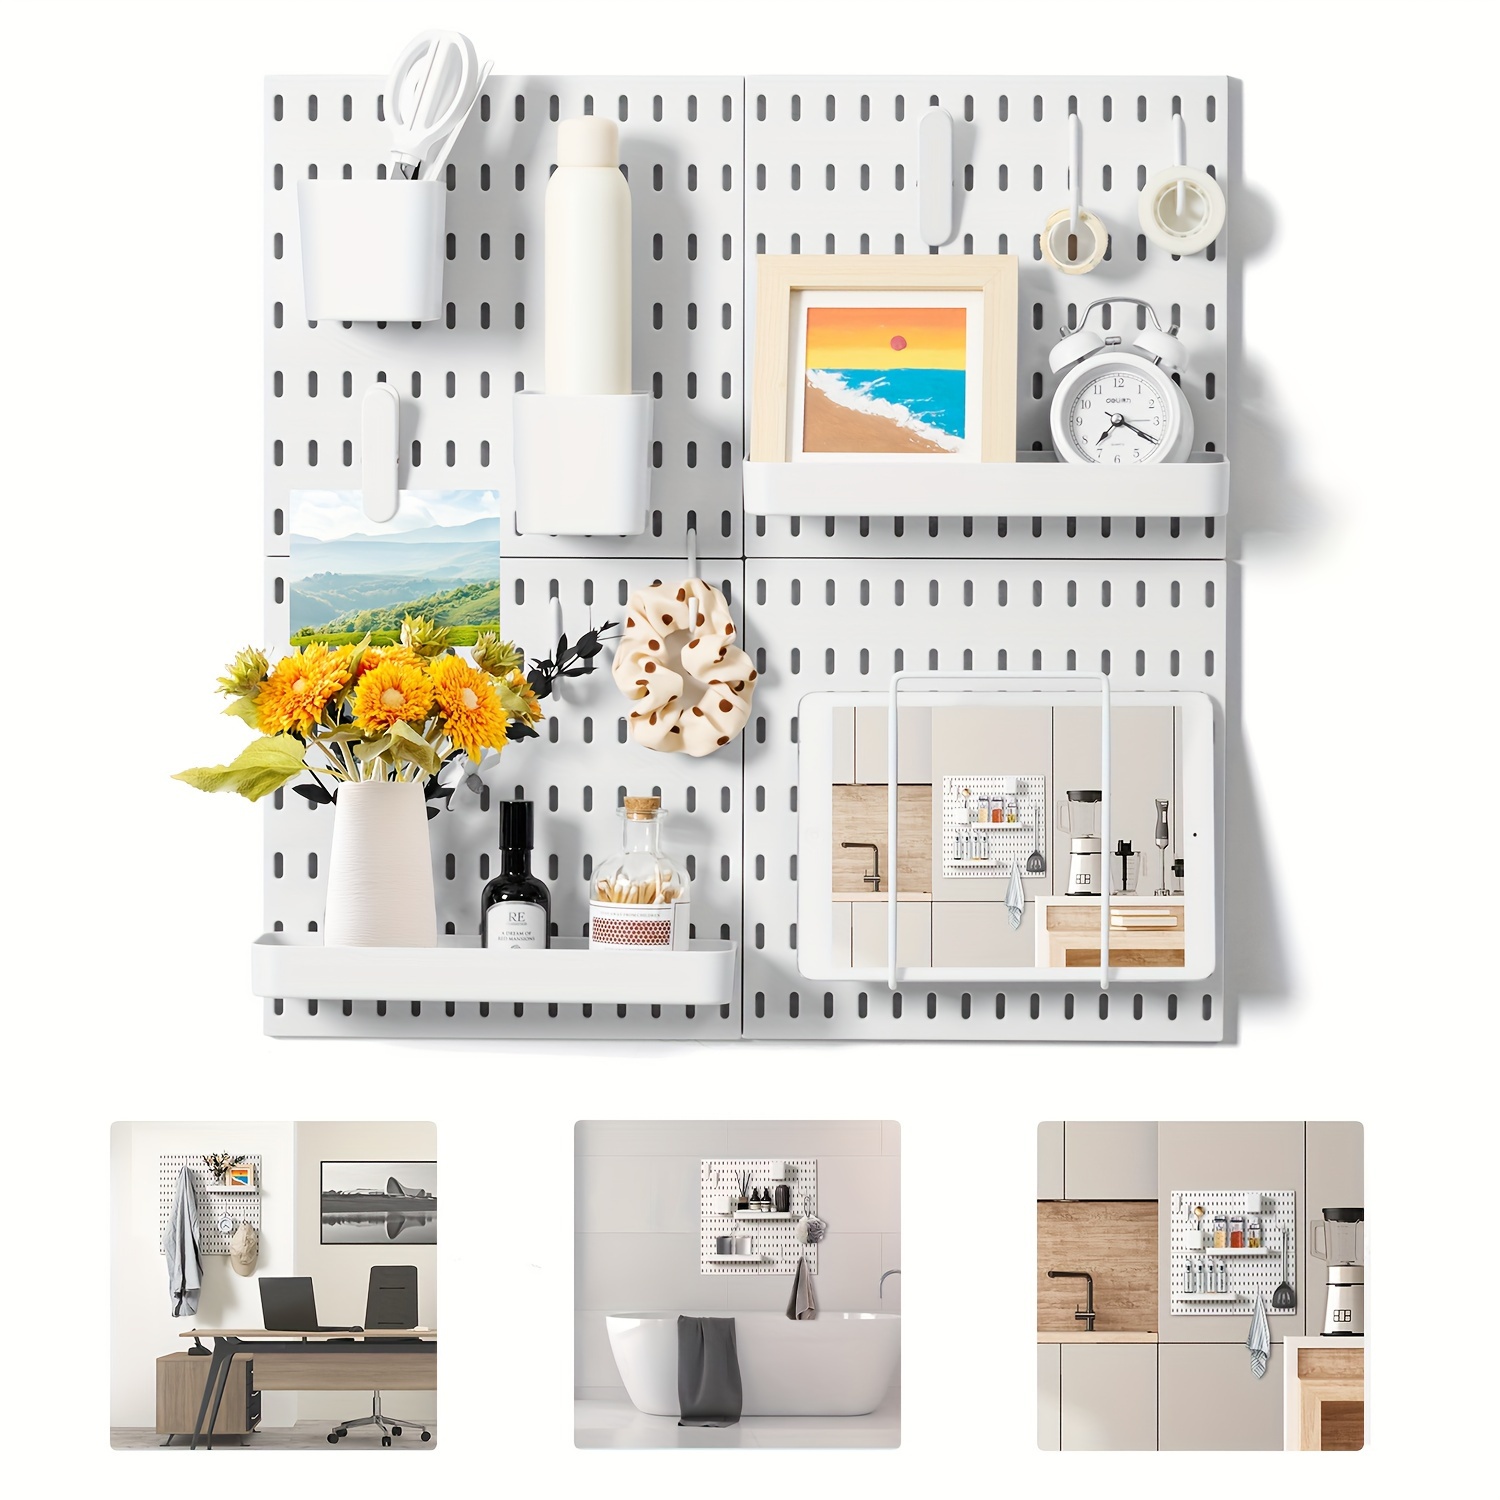 

Deli 22" X 22" White Pegboard Combination Kit, With 4 Pegboards And 17 Accessories Modular Hanging For Wall Organizer, Wall Mounted Storage Set For Home And Office